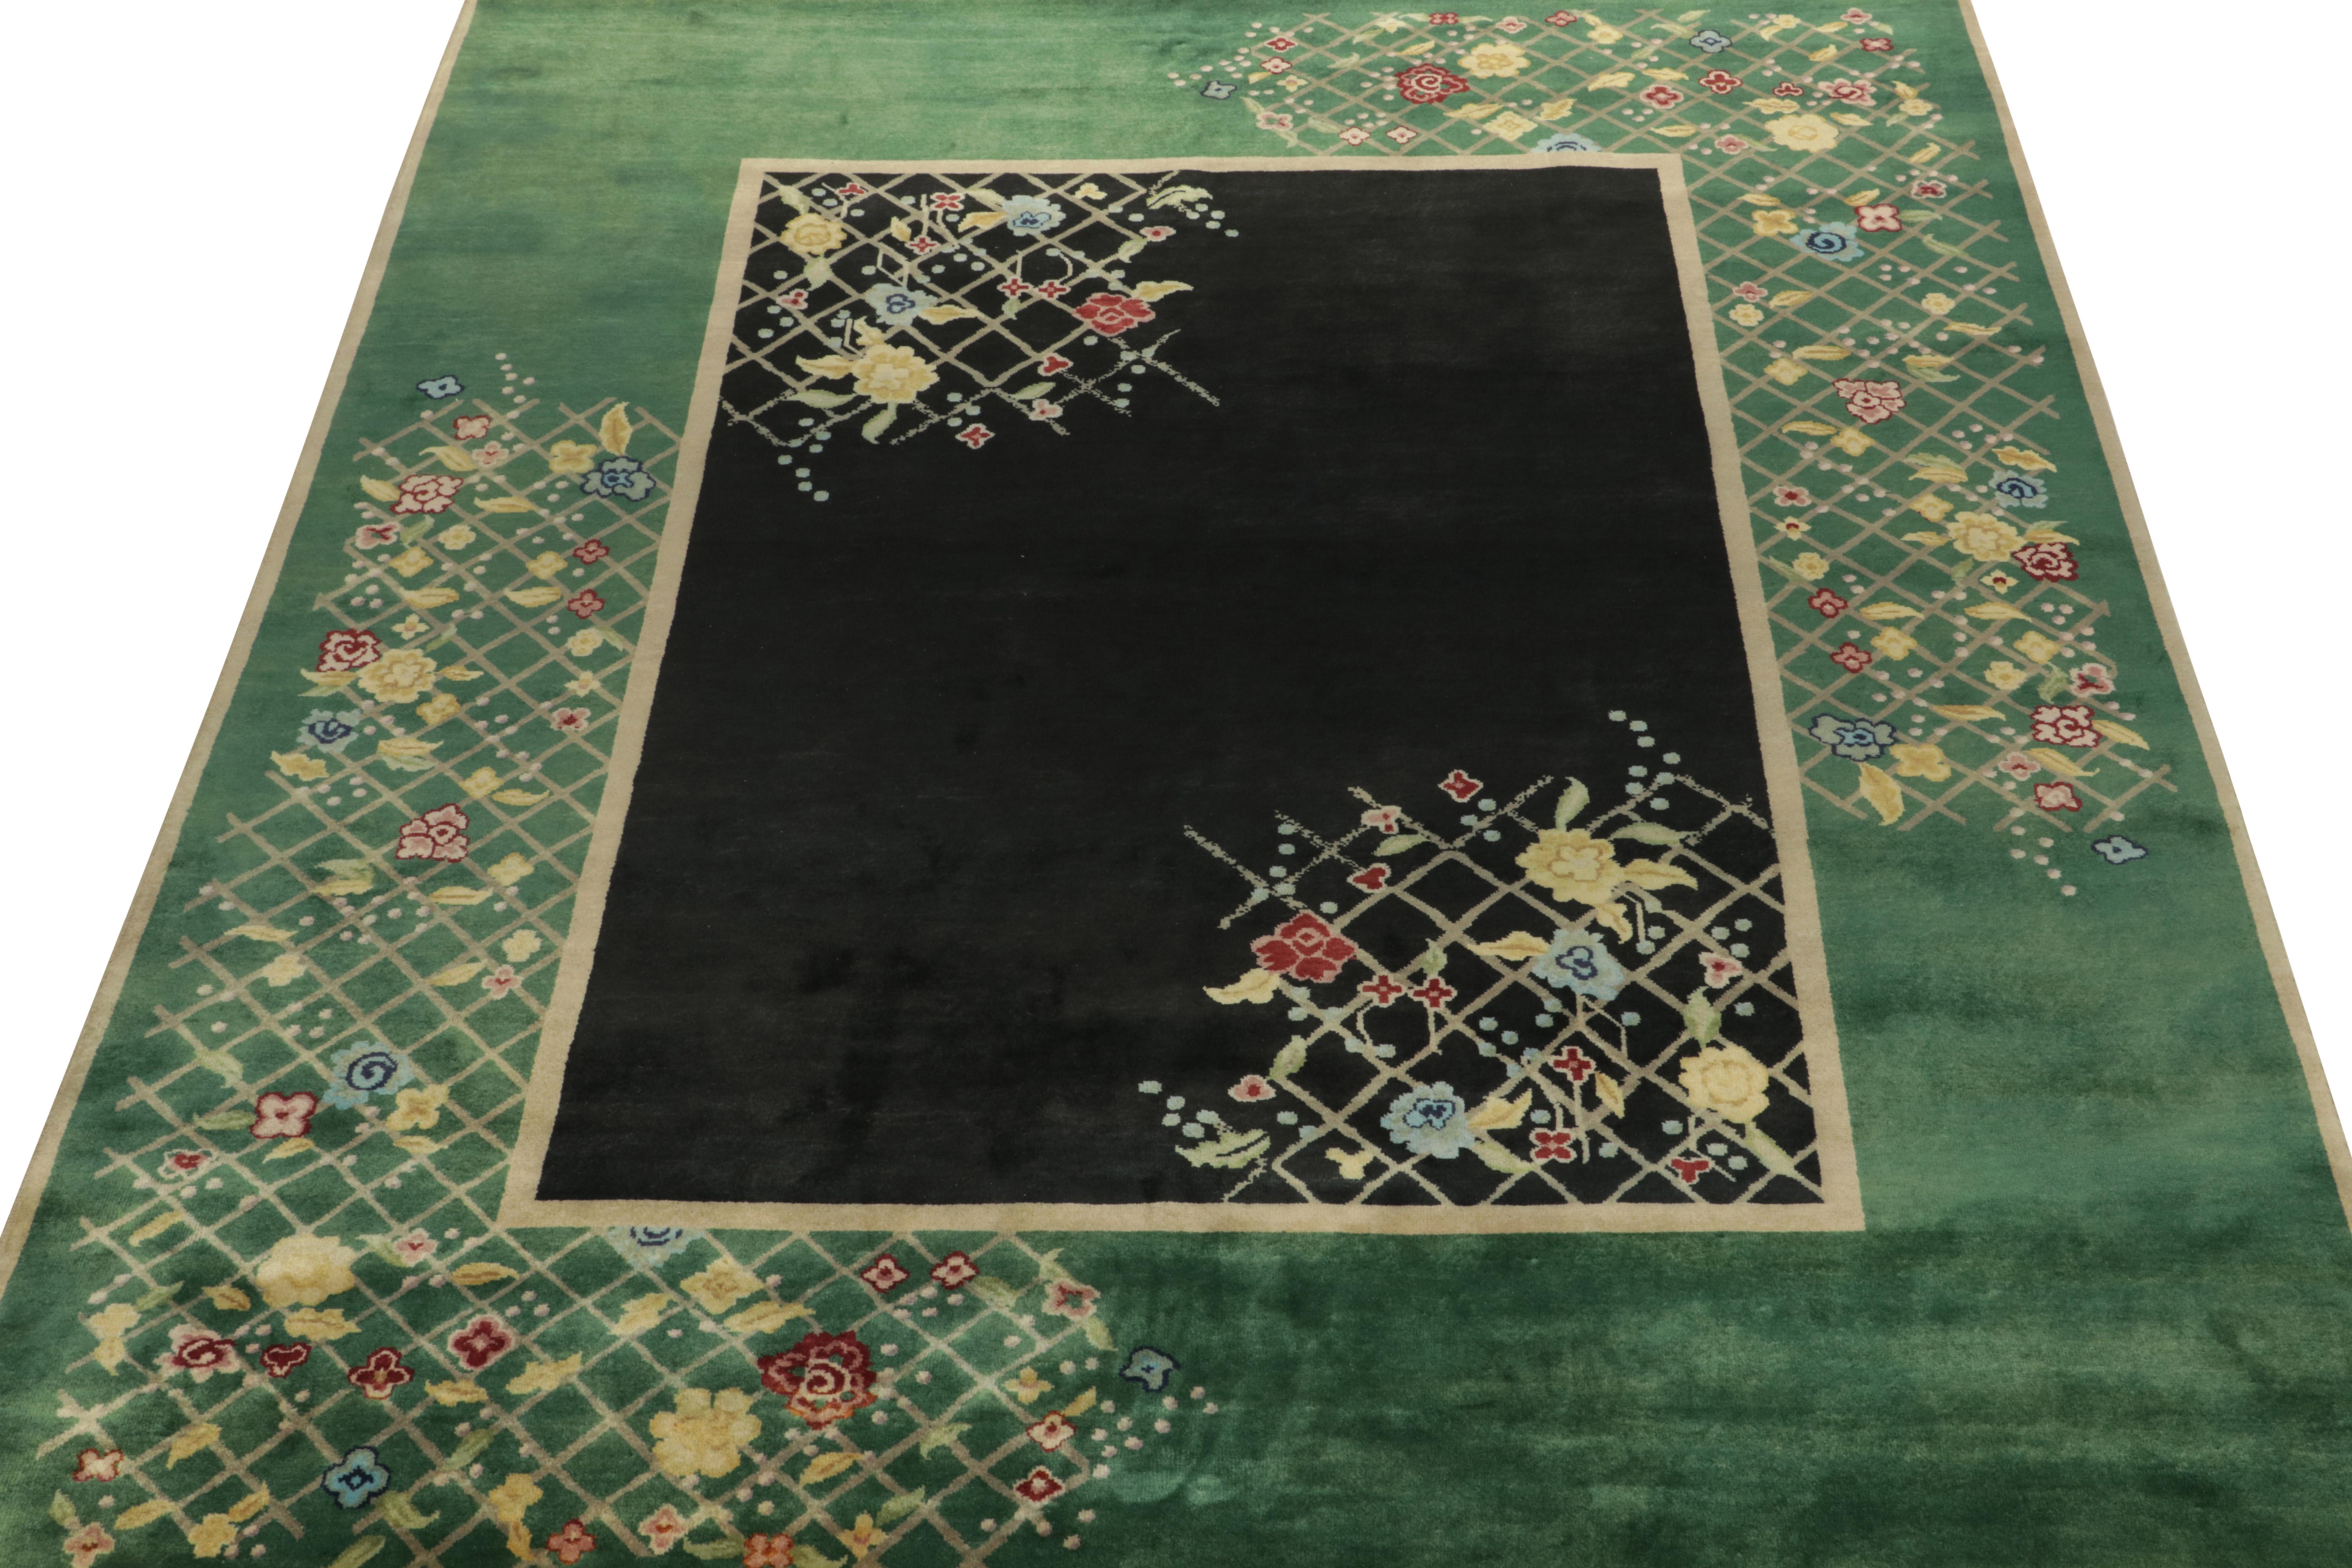 Art Deco Chinese Deco Style Rug in Teal-Green, Black with Colorful Florals by Rug & Kilim For Sale